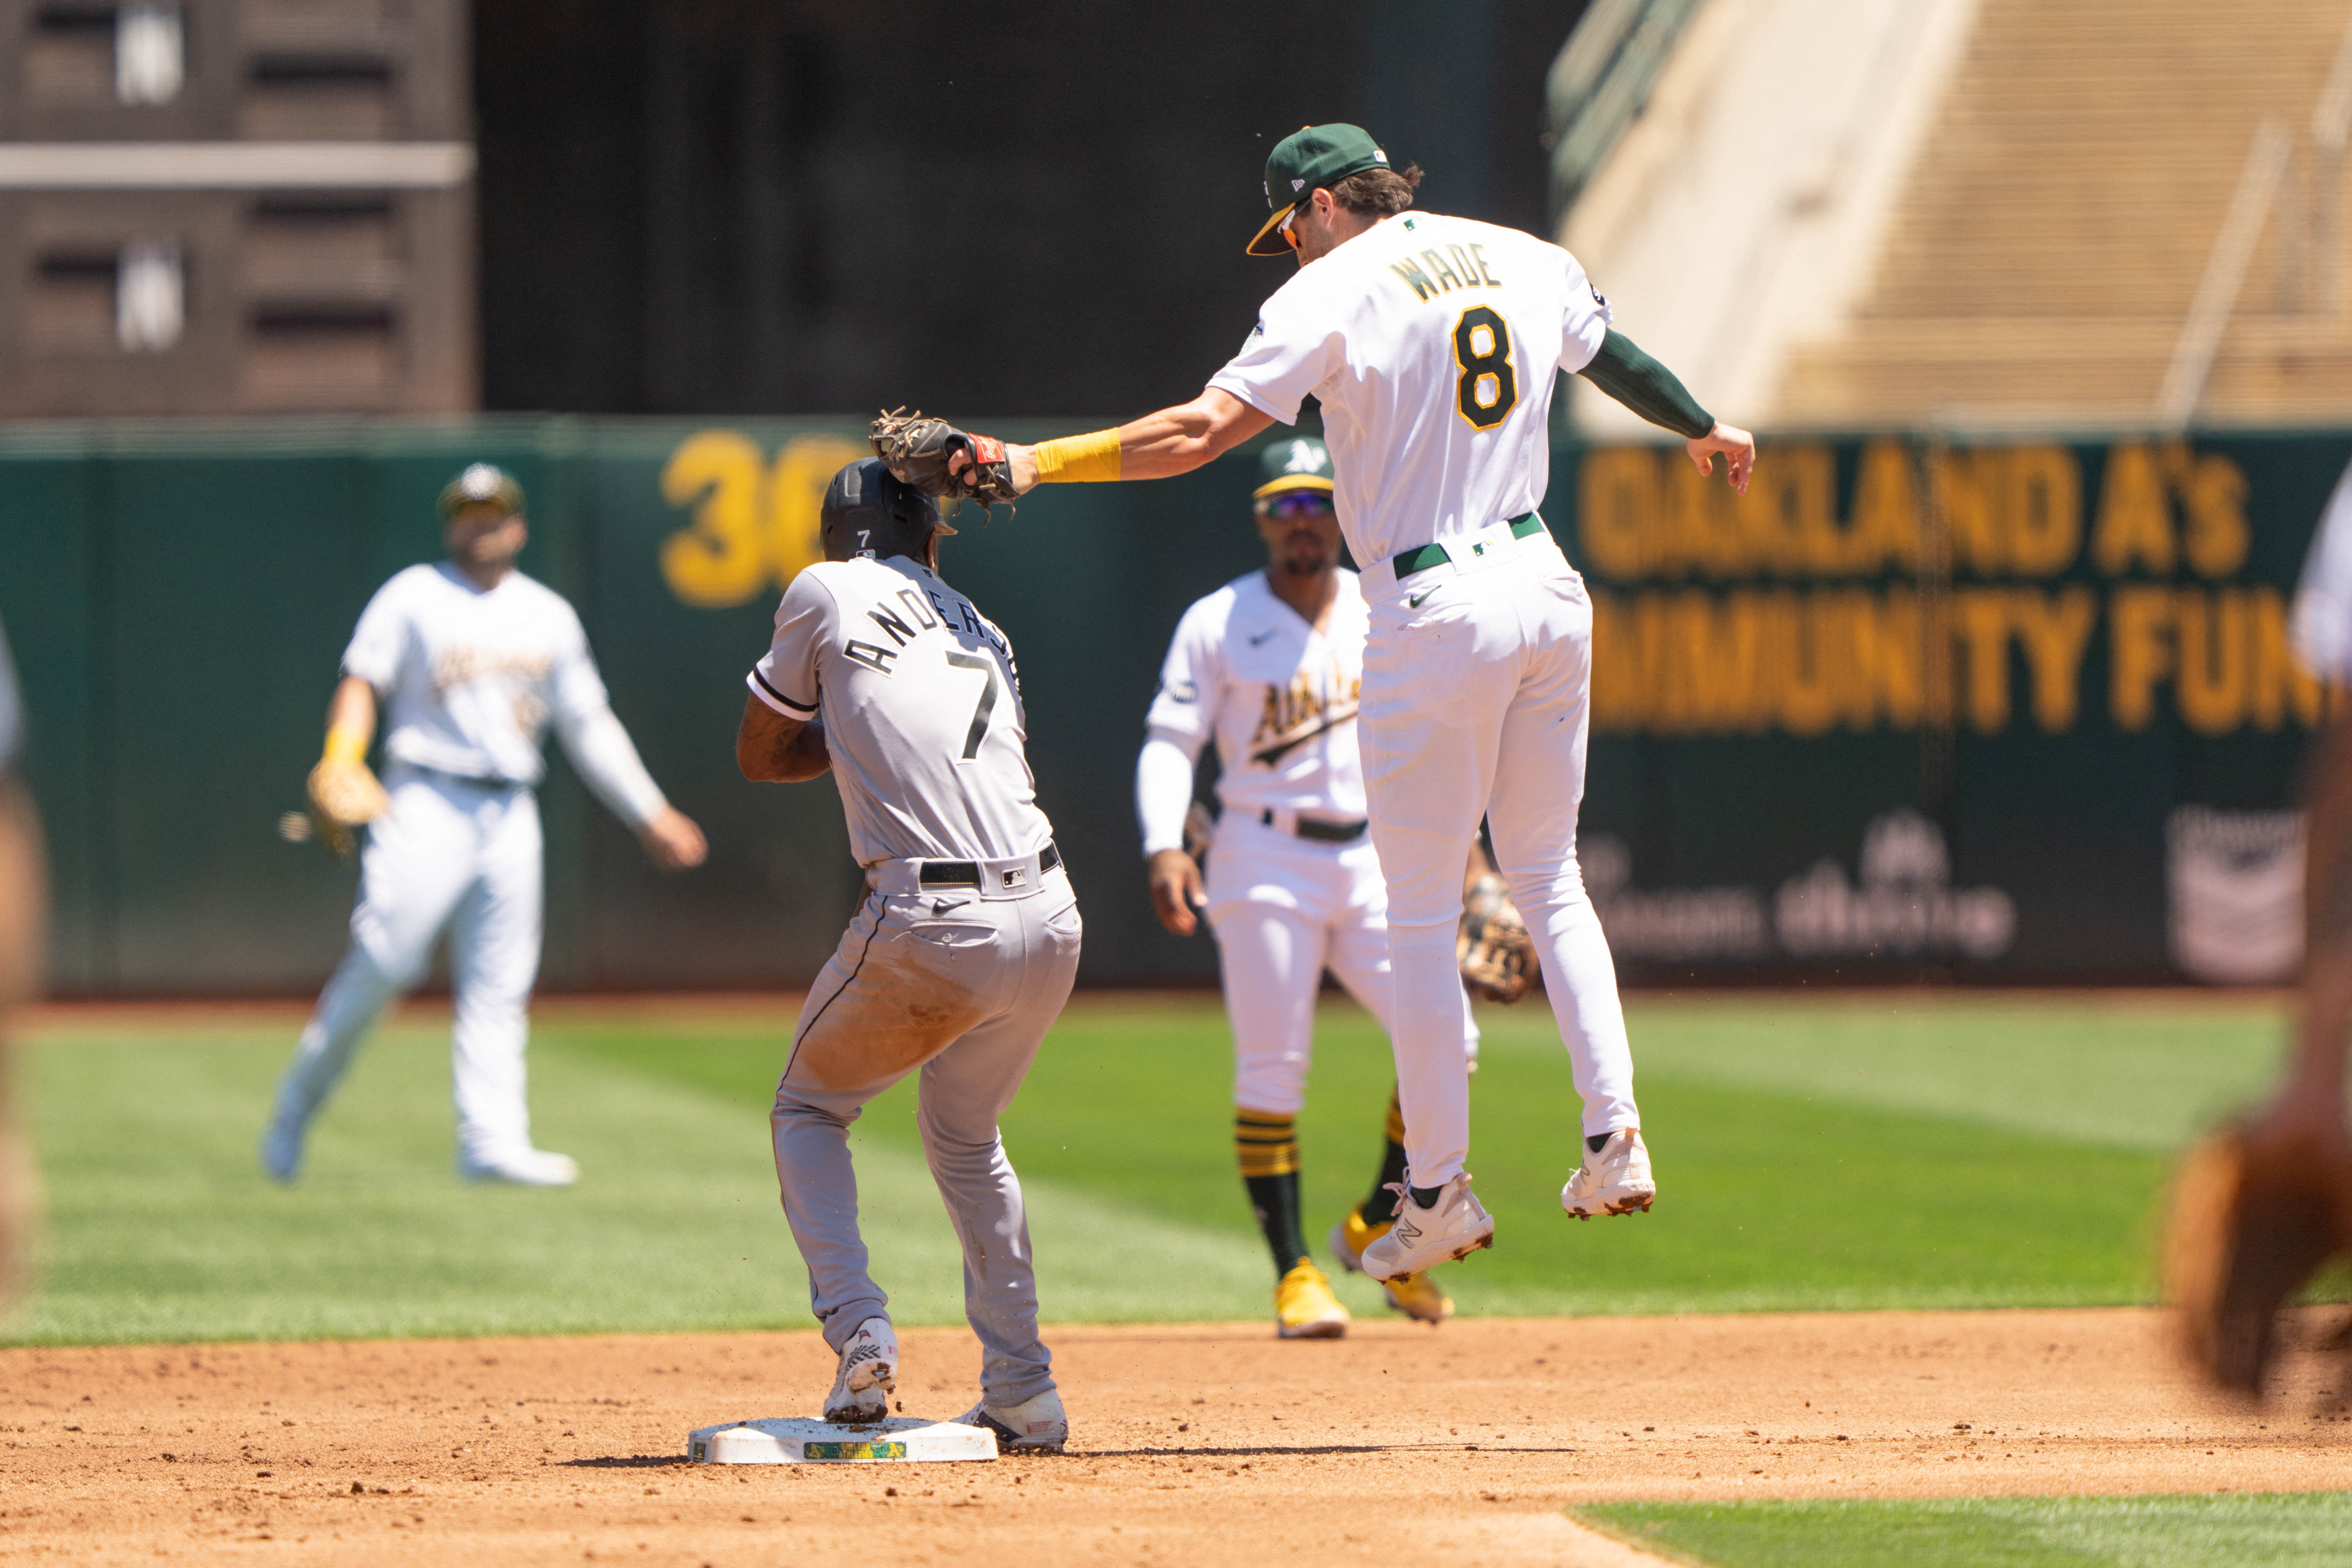 4/5/16: Rollins homer lifts White Sox over A's 